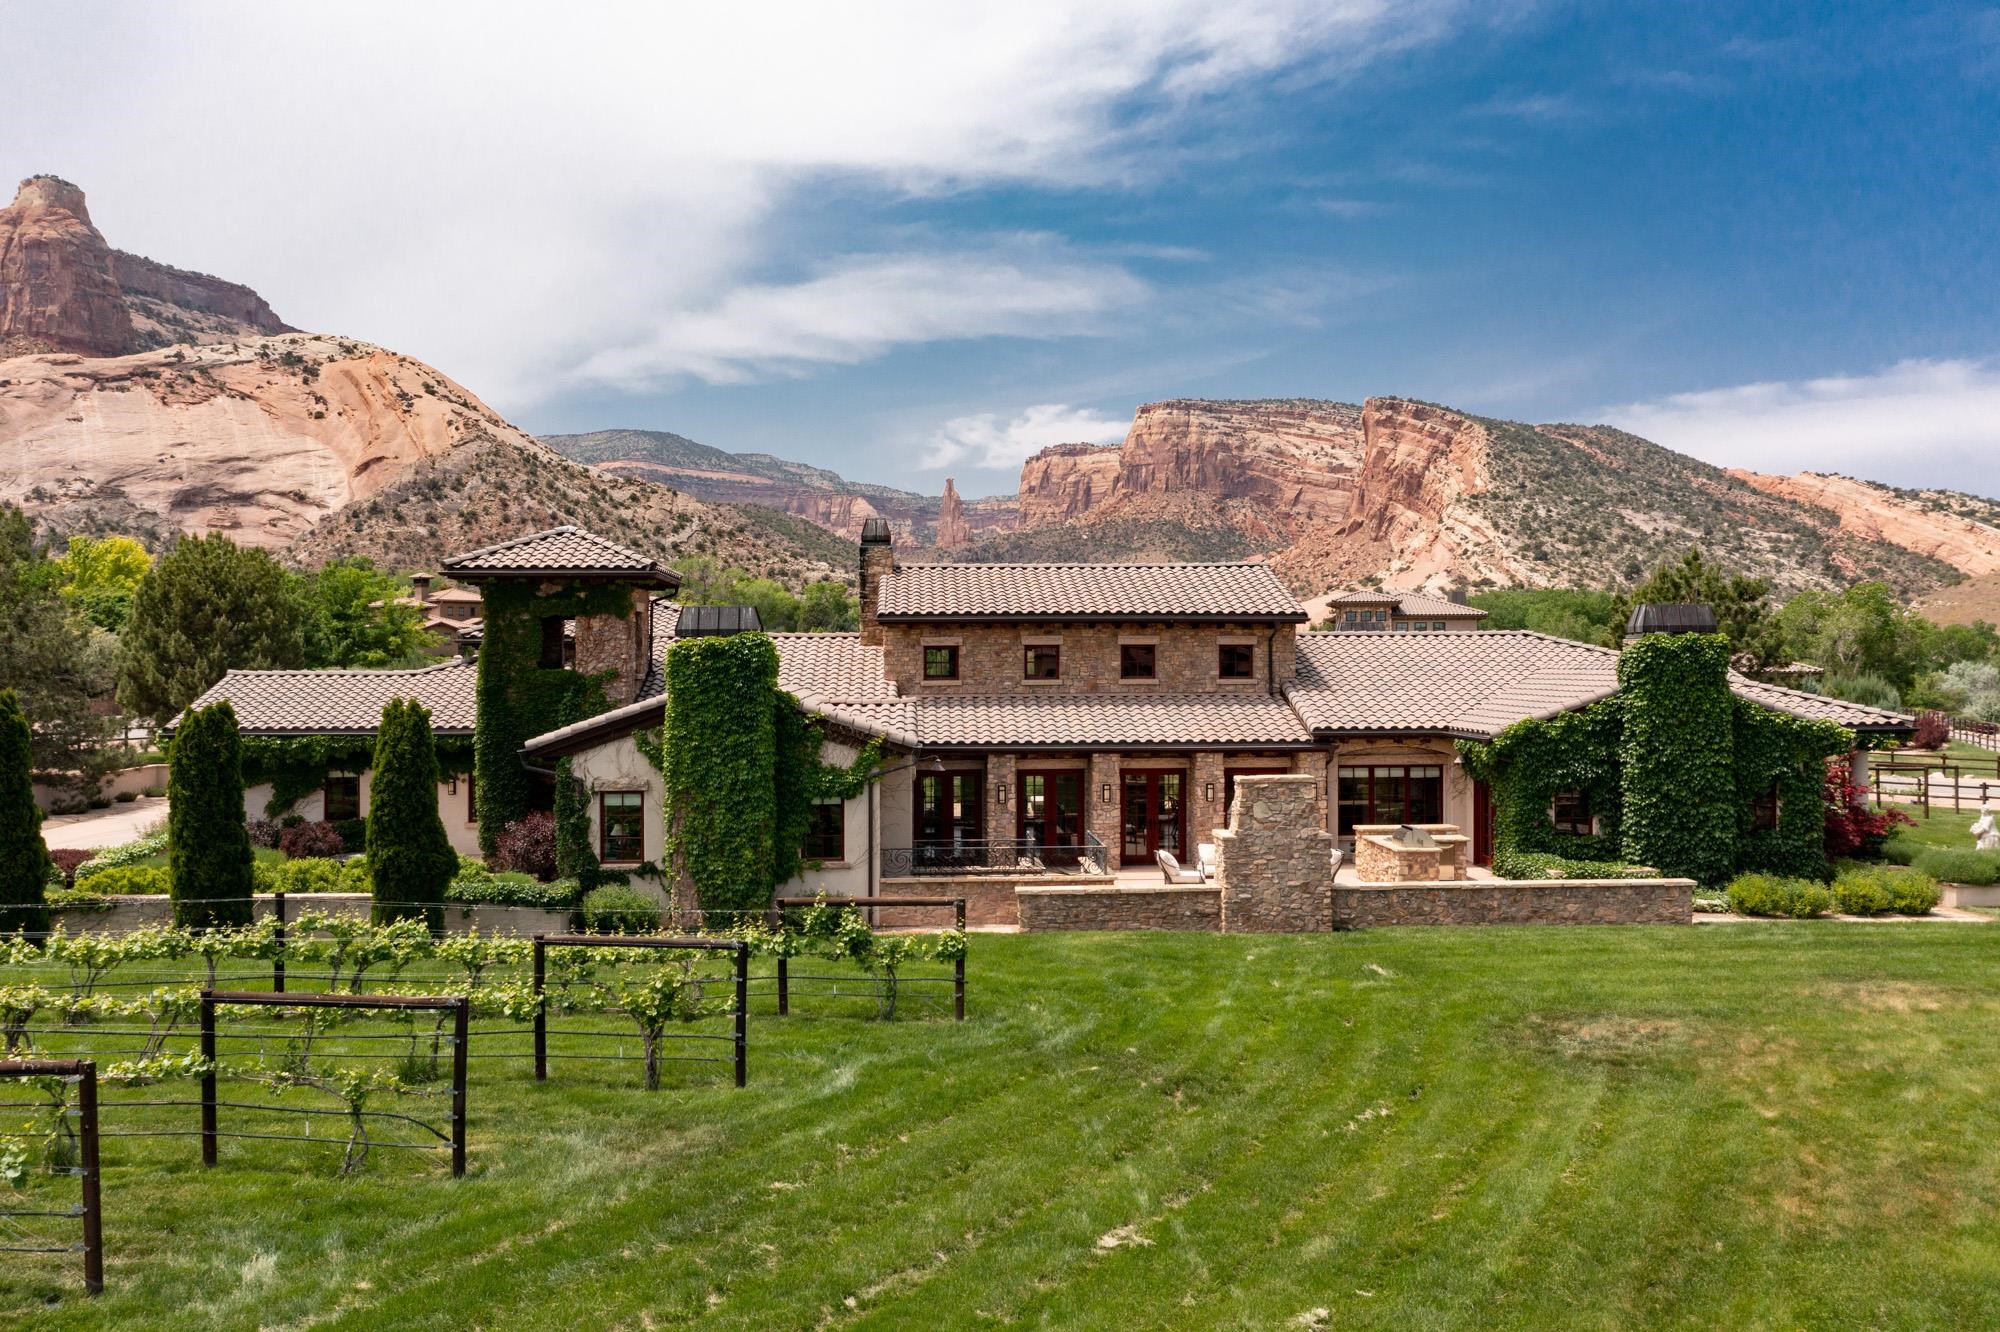 This magnificent estate located at 1954 Stone Canyon Court in Grand Junction, CO offers breathtaking unobstructed views of Independence Rock and the Colorado National Monument. The main house boasts just under 6,000 sq. ft. of luxurious living space, and there is an additional 836 sq. ft. detached Vintner's Cotttage that is perfect for guests or a caretaker. The property includes a private vineyard that offers the the opportunity to savor the fruits of your own labor and create your very own vintage wine.   As you enter the main house, you will be greeted by vaulted ceilings in the living room and stunning views of the mountains. The home features seven cozy fireplaces, including one in the outdoor kitchen that is perfect for entertaining guests. The travertine bathtub and bronze sinks in the bathrooms add a touch of elegance to the home.  The gourmet kitchen is equipped with high-end appliances, making it perfect for cooking and entertaining.   The owners suite has its own private patio where you can enjoy stunning views of the Monument and vineyard. The outdoor living space features many large patio areas with picture perfect views in all directions.  This is a once-in-a-lifetime opportunity to own a stunning estate with a private vineyard in a prime location. Don't miss out on this amazing opportunity to own a piece of paradise in Grand Junction, CO.